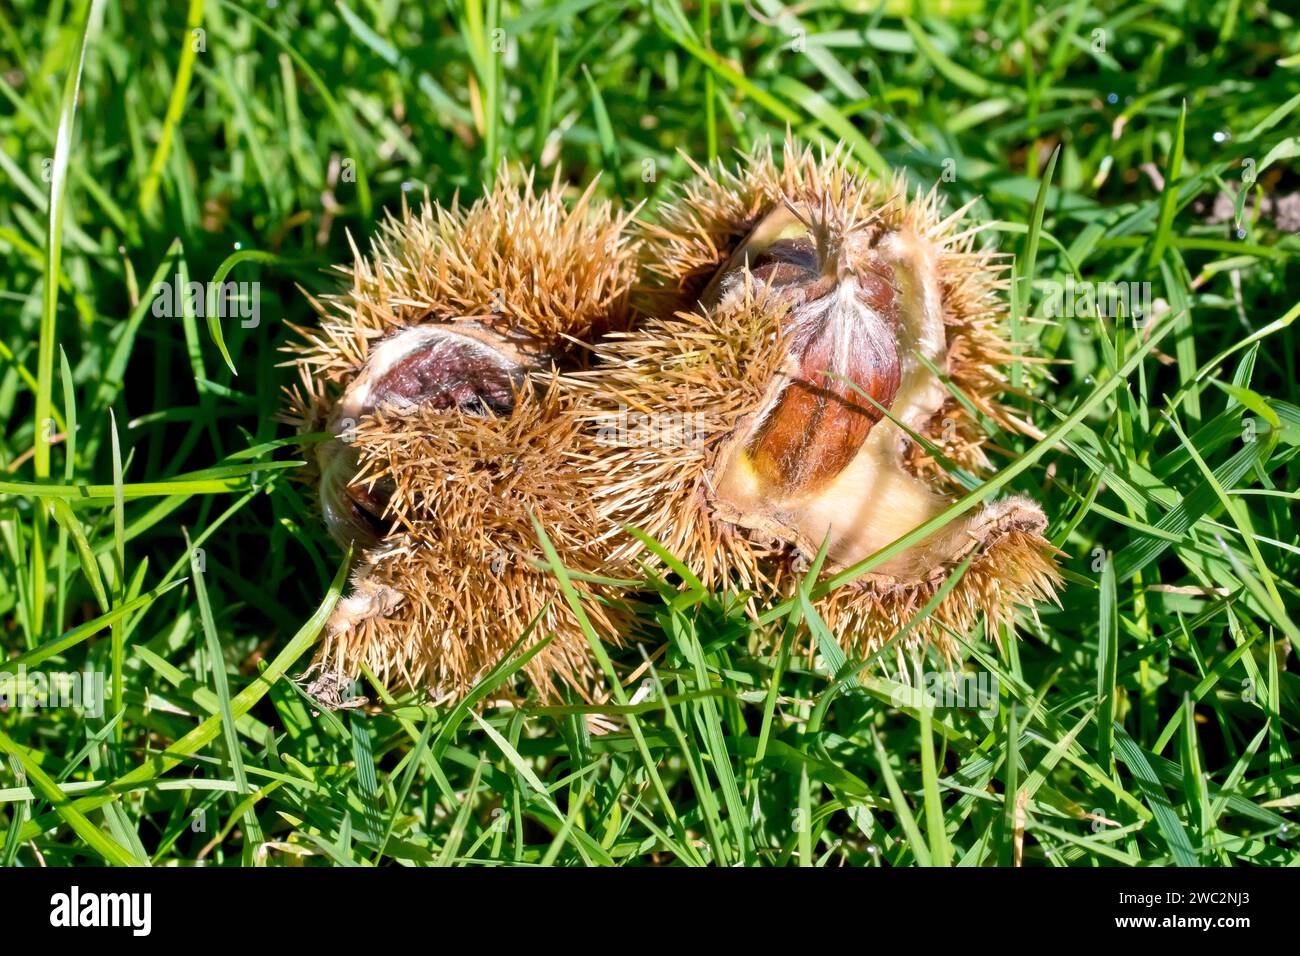 Sweet Chestnut or Spanish Chestnut (castanea sativa), close up of the spiky fruits laying on the grass beneath a tree, opening in the autumn sunshine. Stock Photo